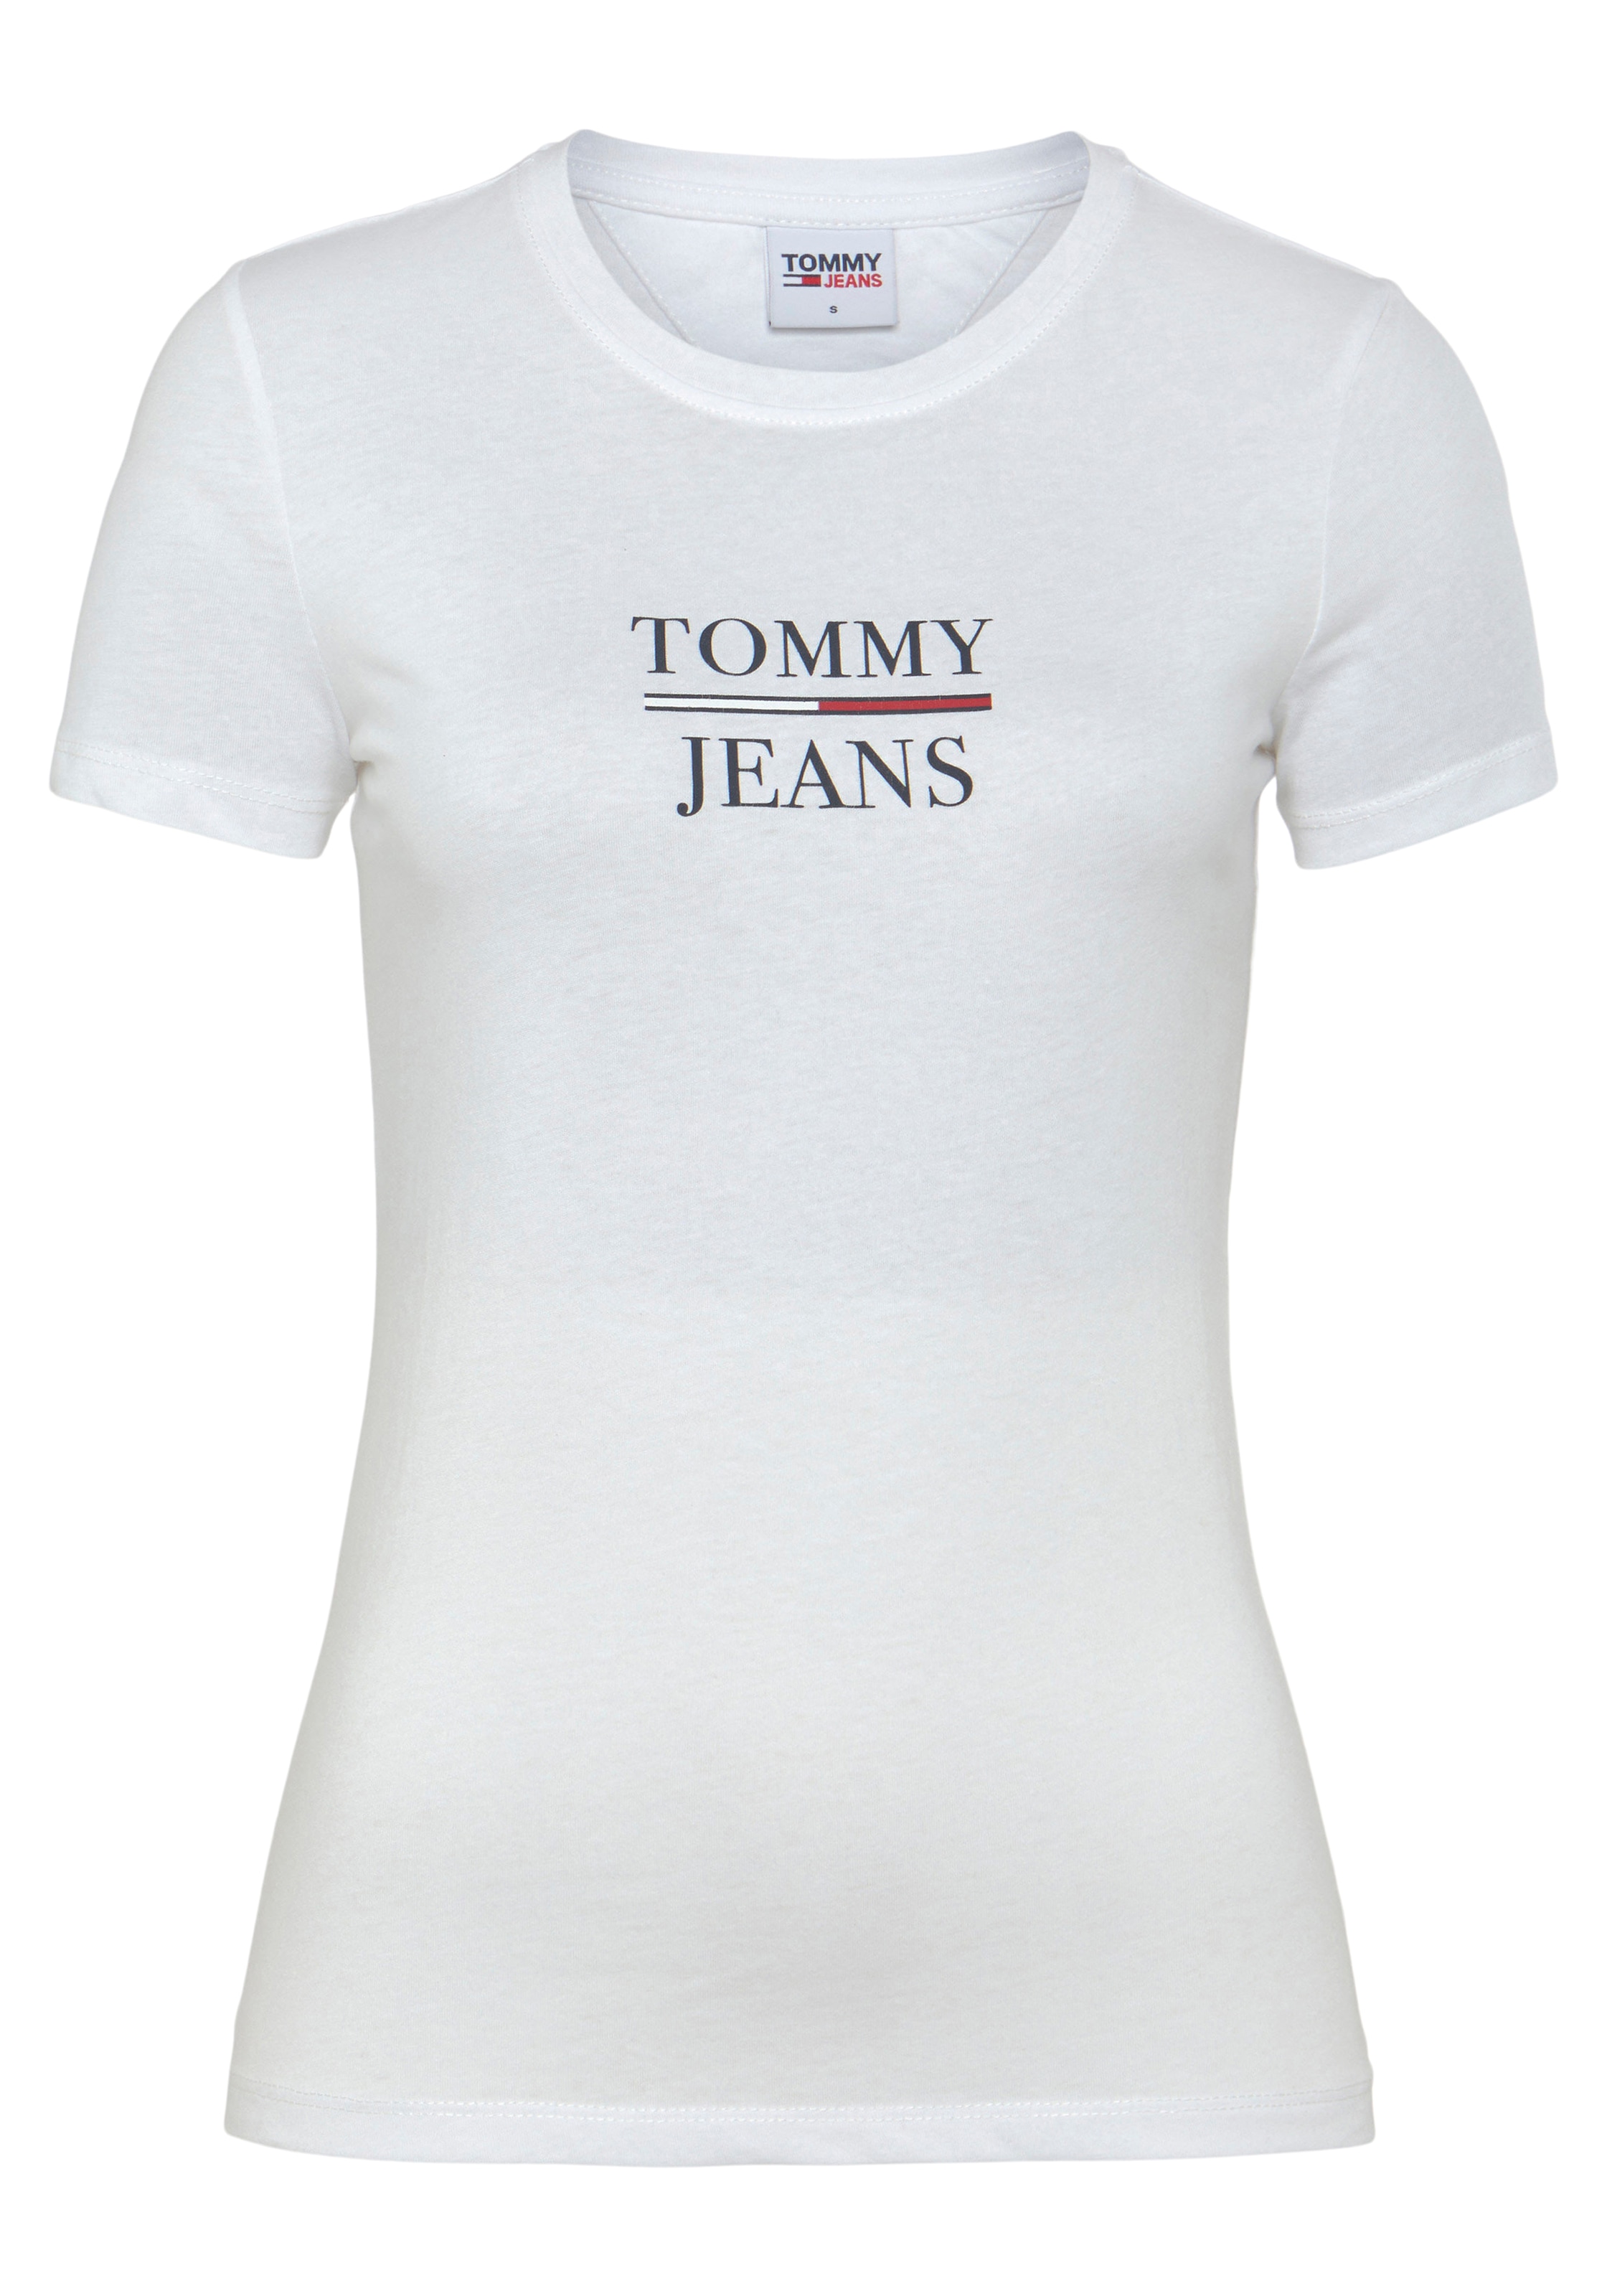 Tommy Jeans TOMMY 2er-Pack) »TJW Skinny SS«, ♕ T-Shirt bei (Packung, T ESS 2PACK